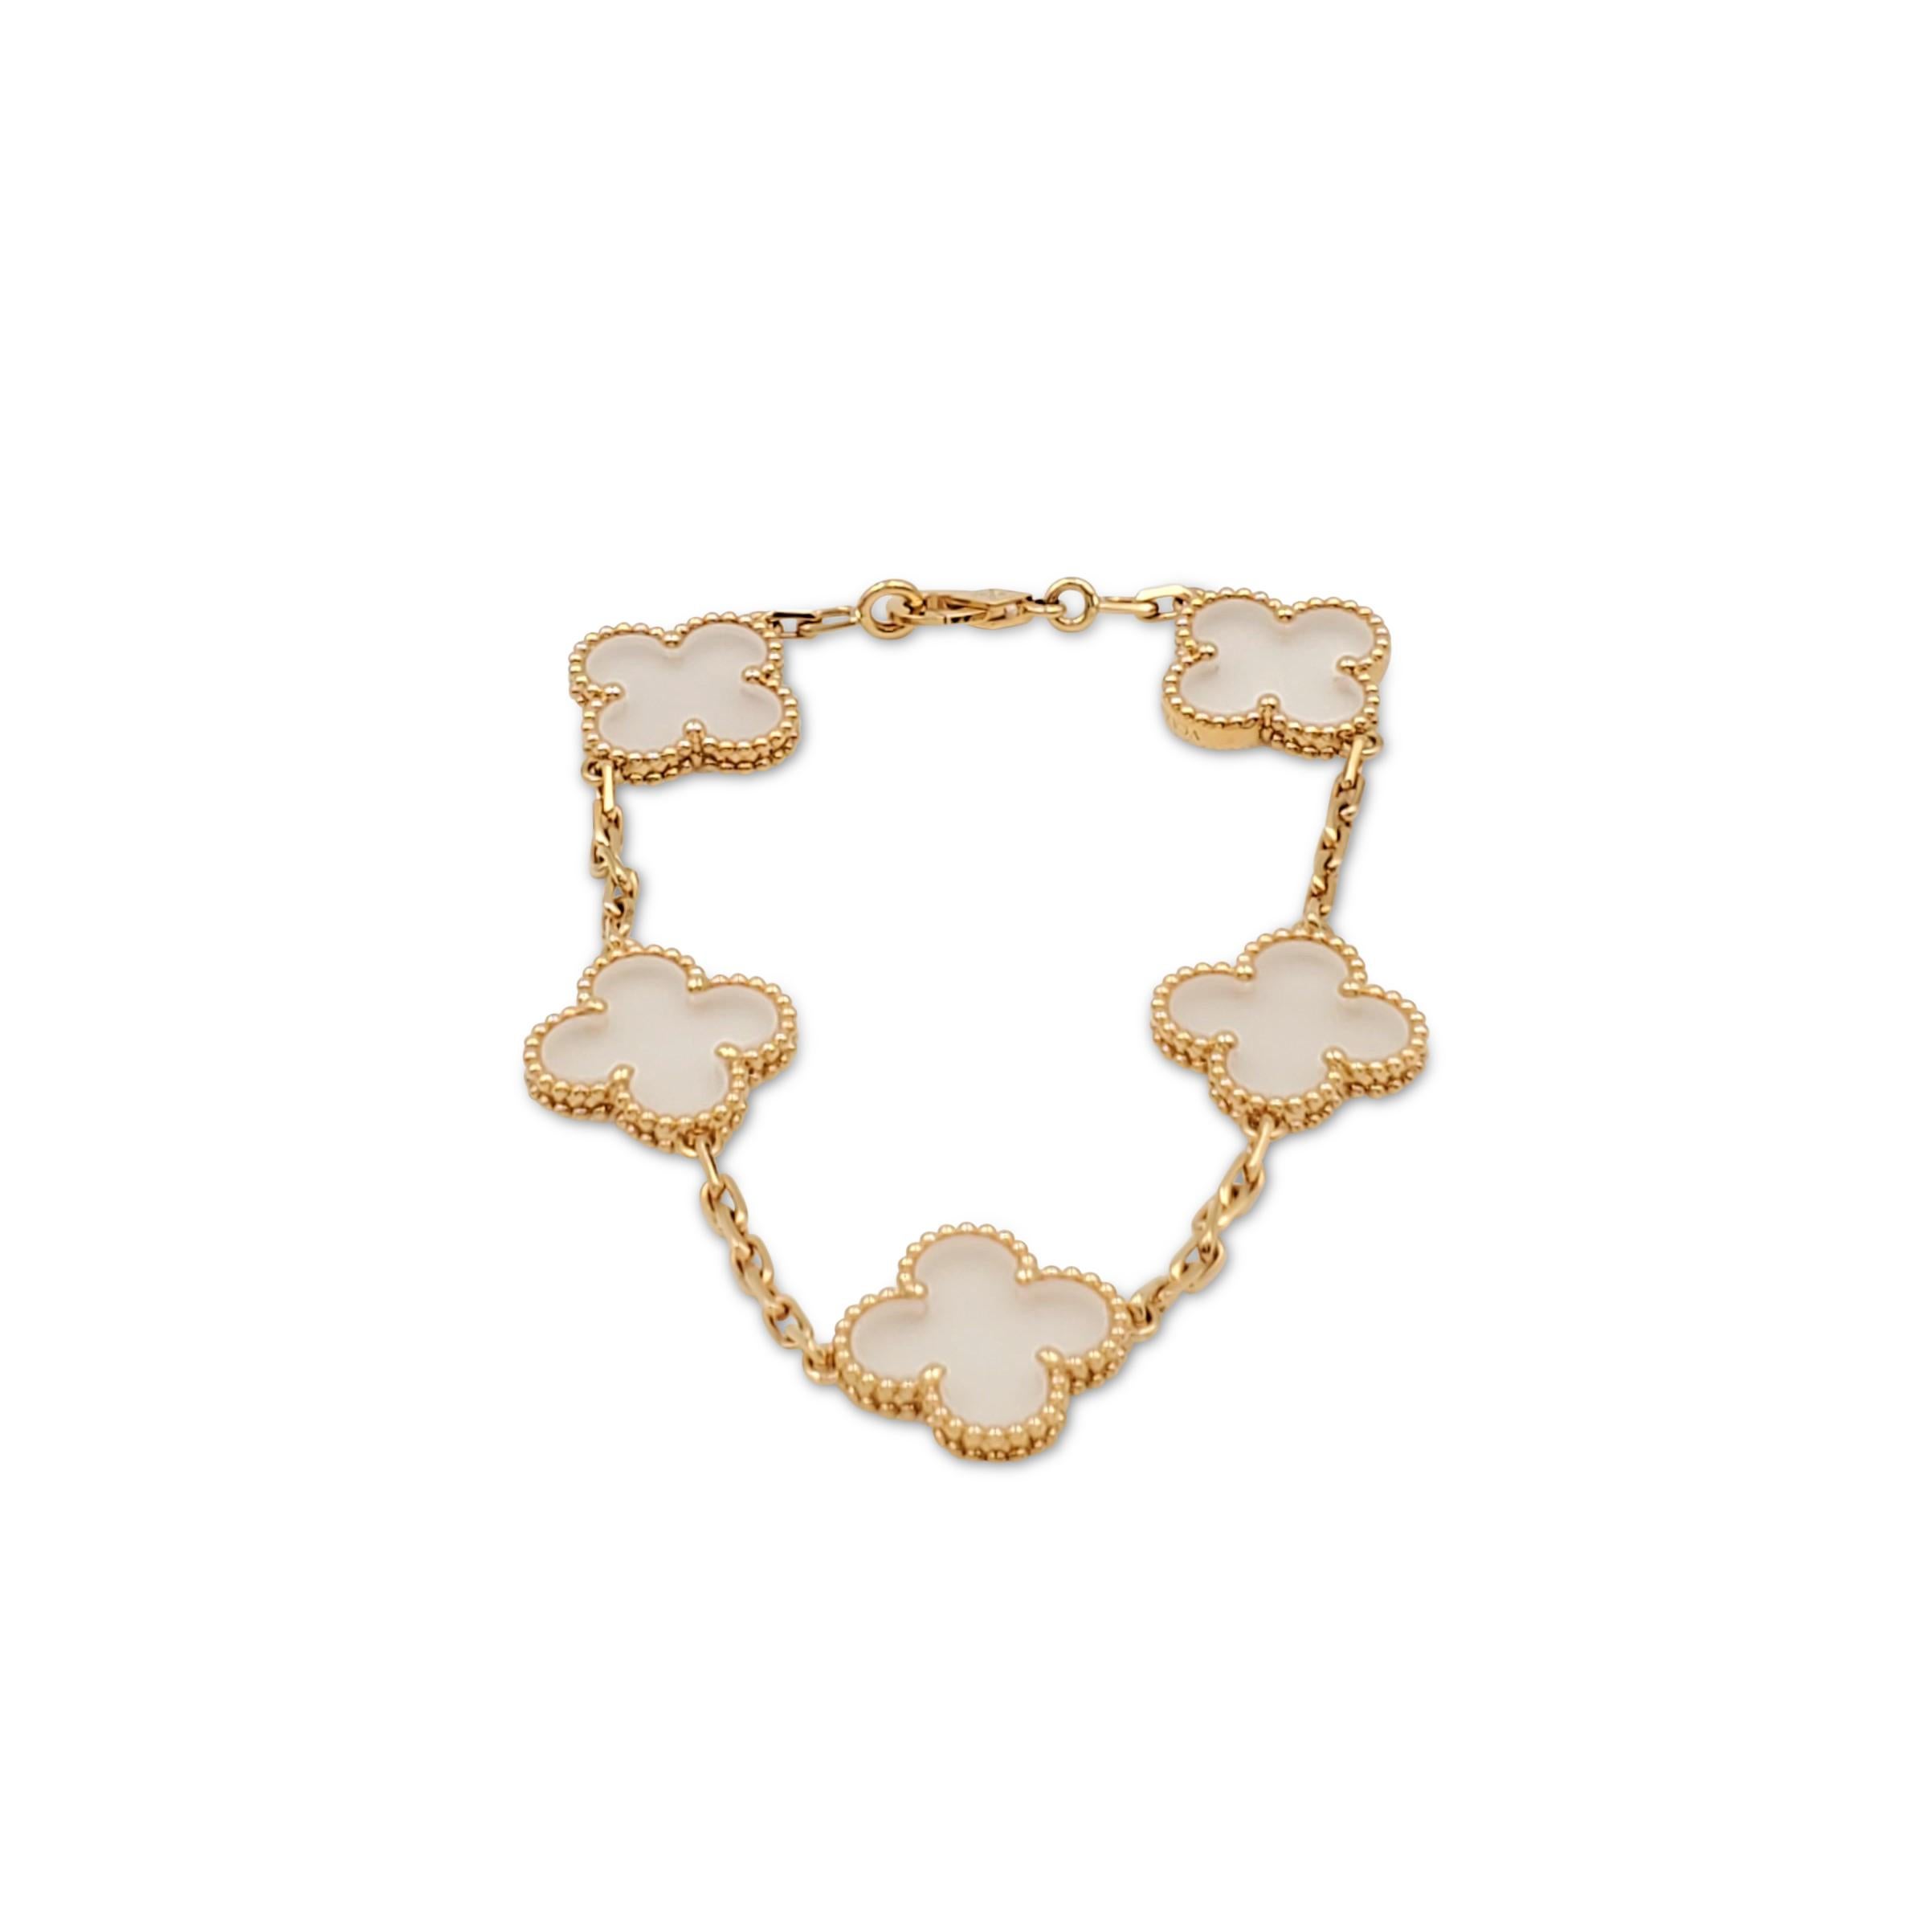 Authentic Van Cleef & Arpels 'Vintage Alhambra' bracelet crafted in 18 karat yellow gold features clover motifs of rock crystal. The bracelet measures 6 1/2 inches in length and is signed VCA, Au750, with serial number and hallmarks. The bracelet is